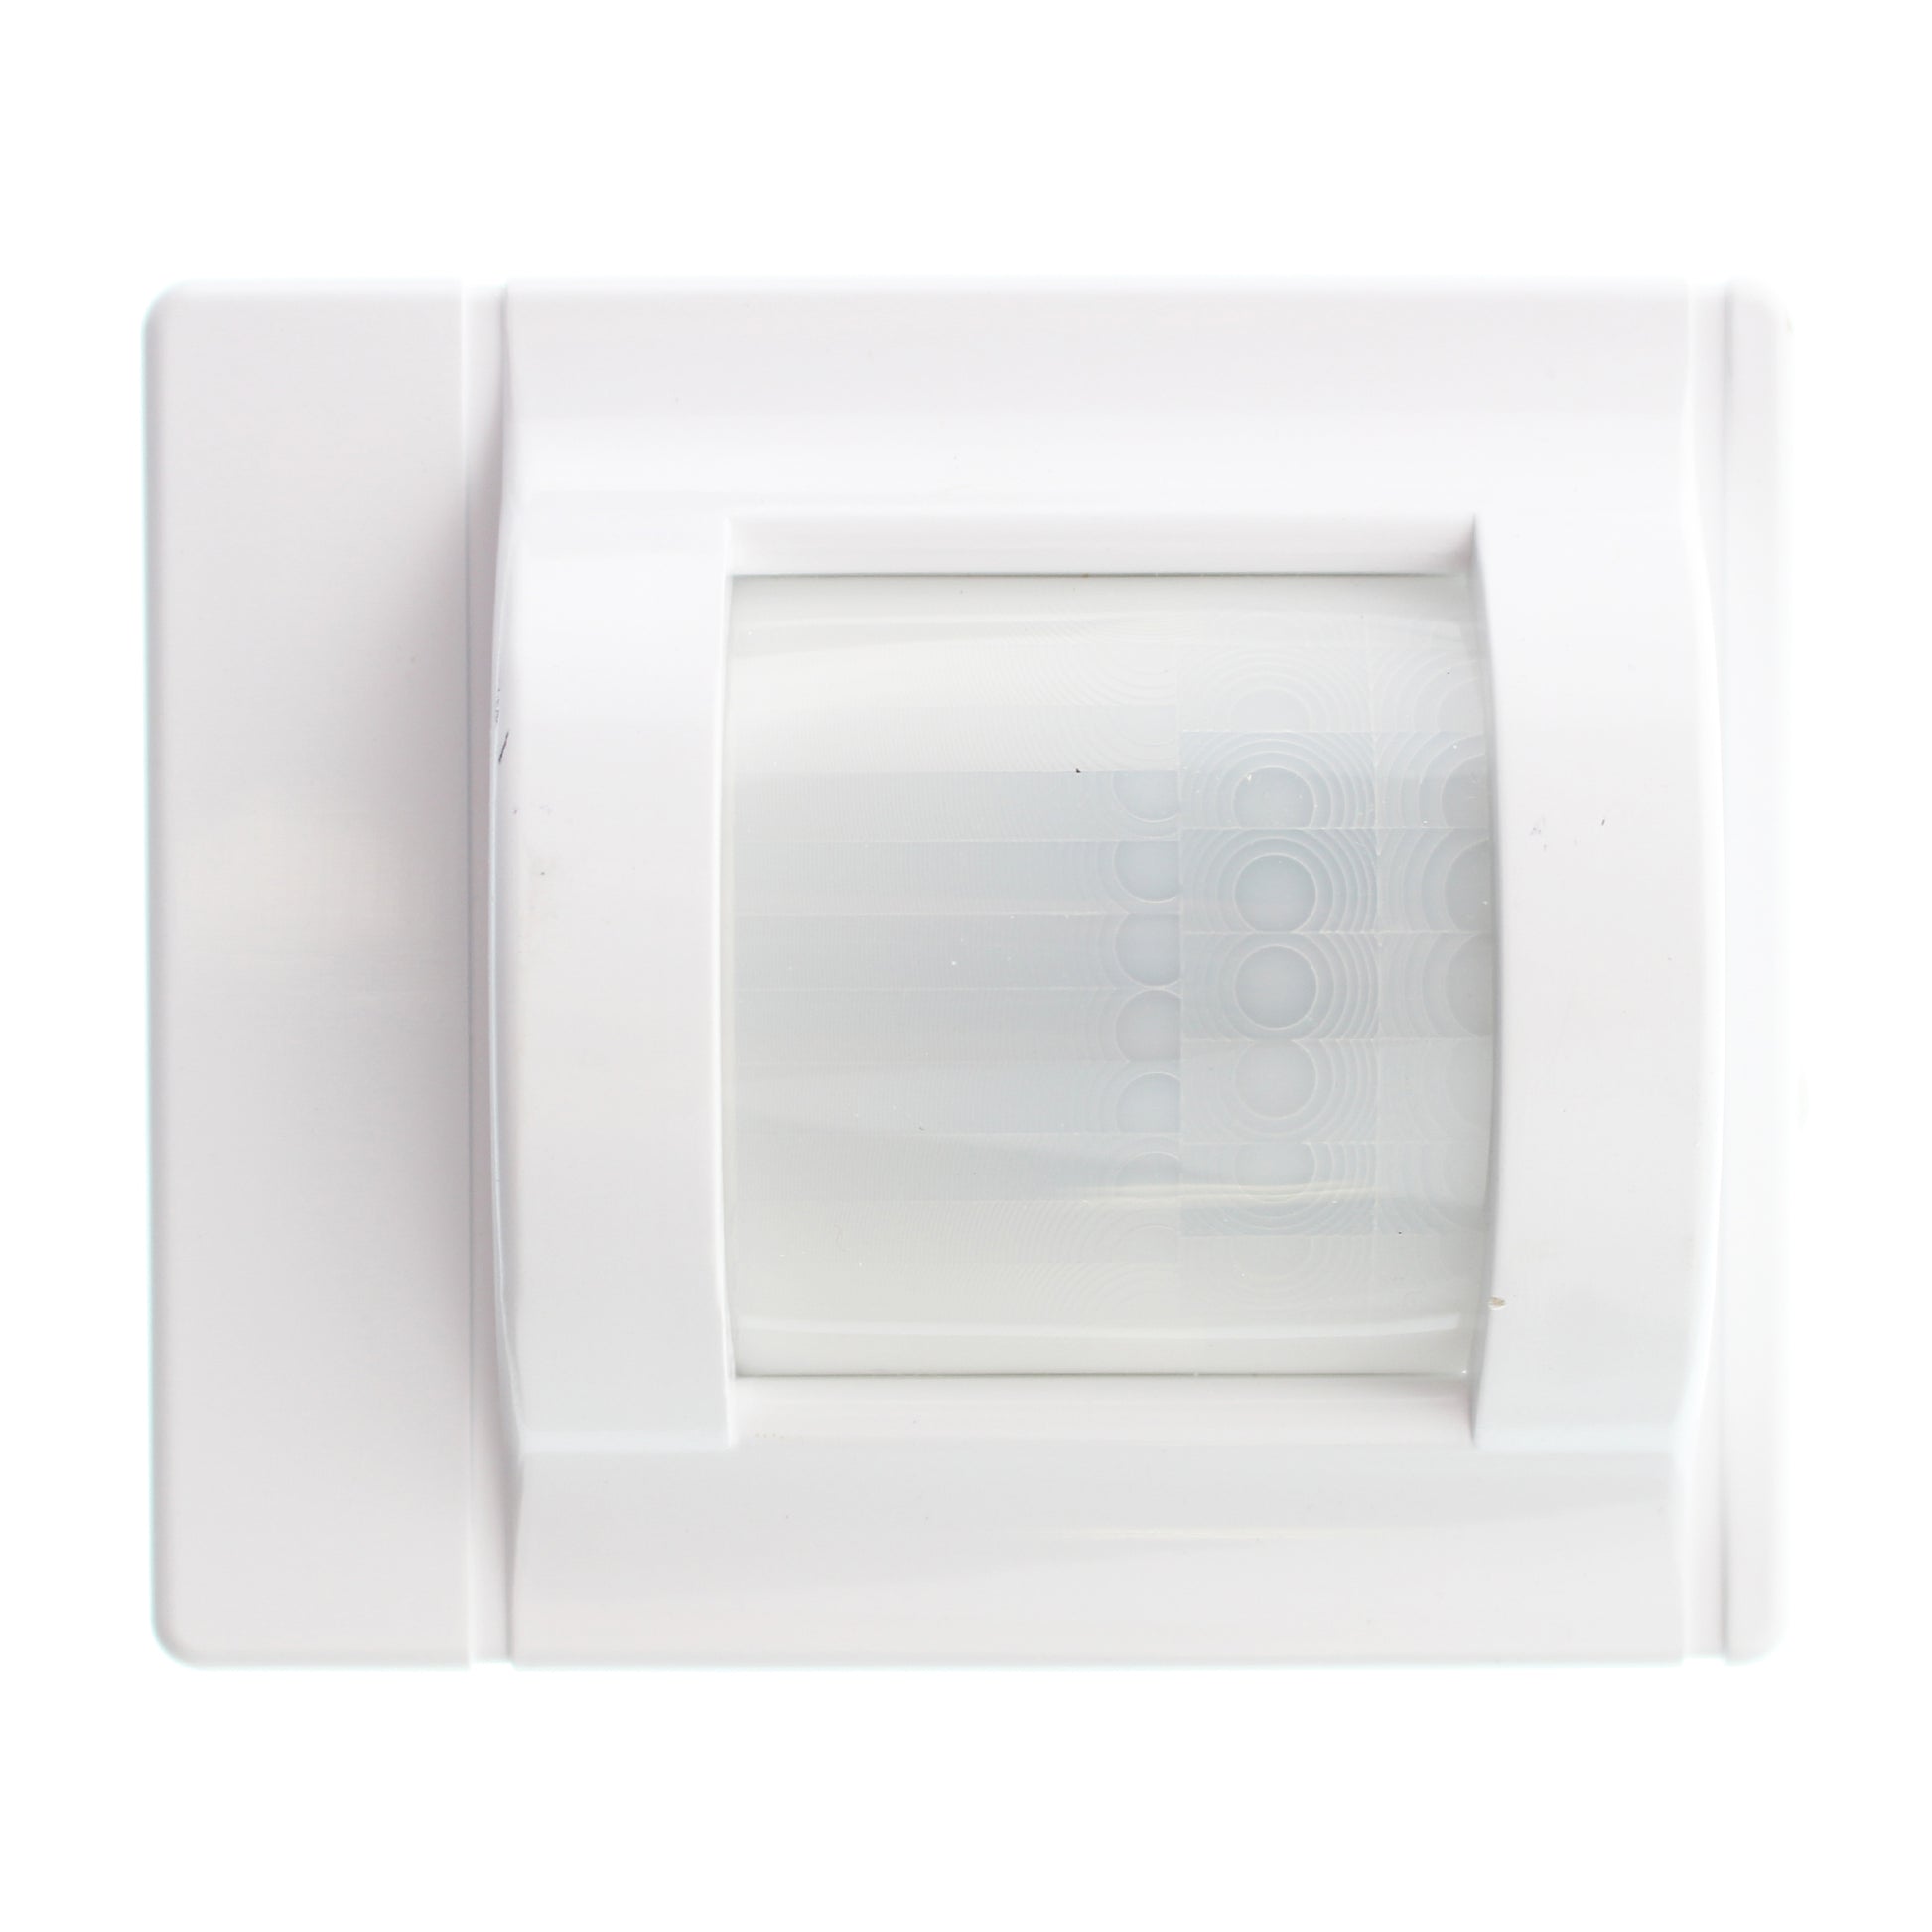 Sensor Switch NWSX-PDT-LV-WH nLight Wall Switch Occupancy Sensor, Low  Voltage, White